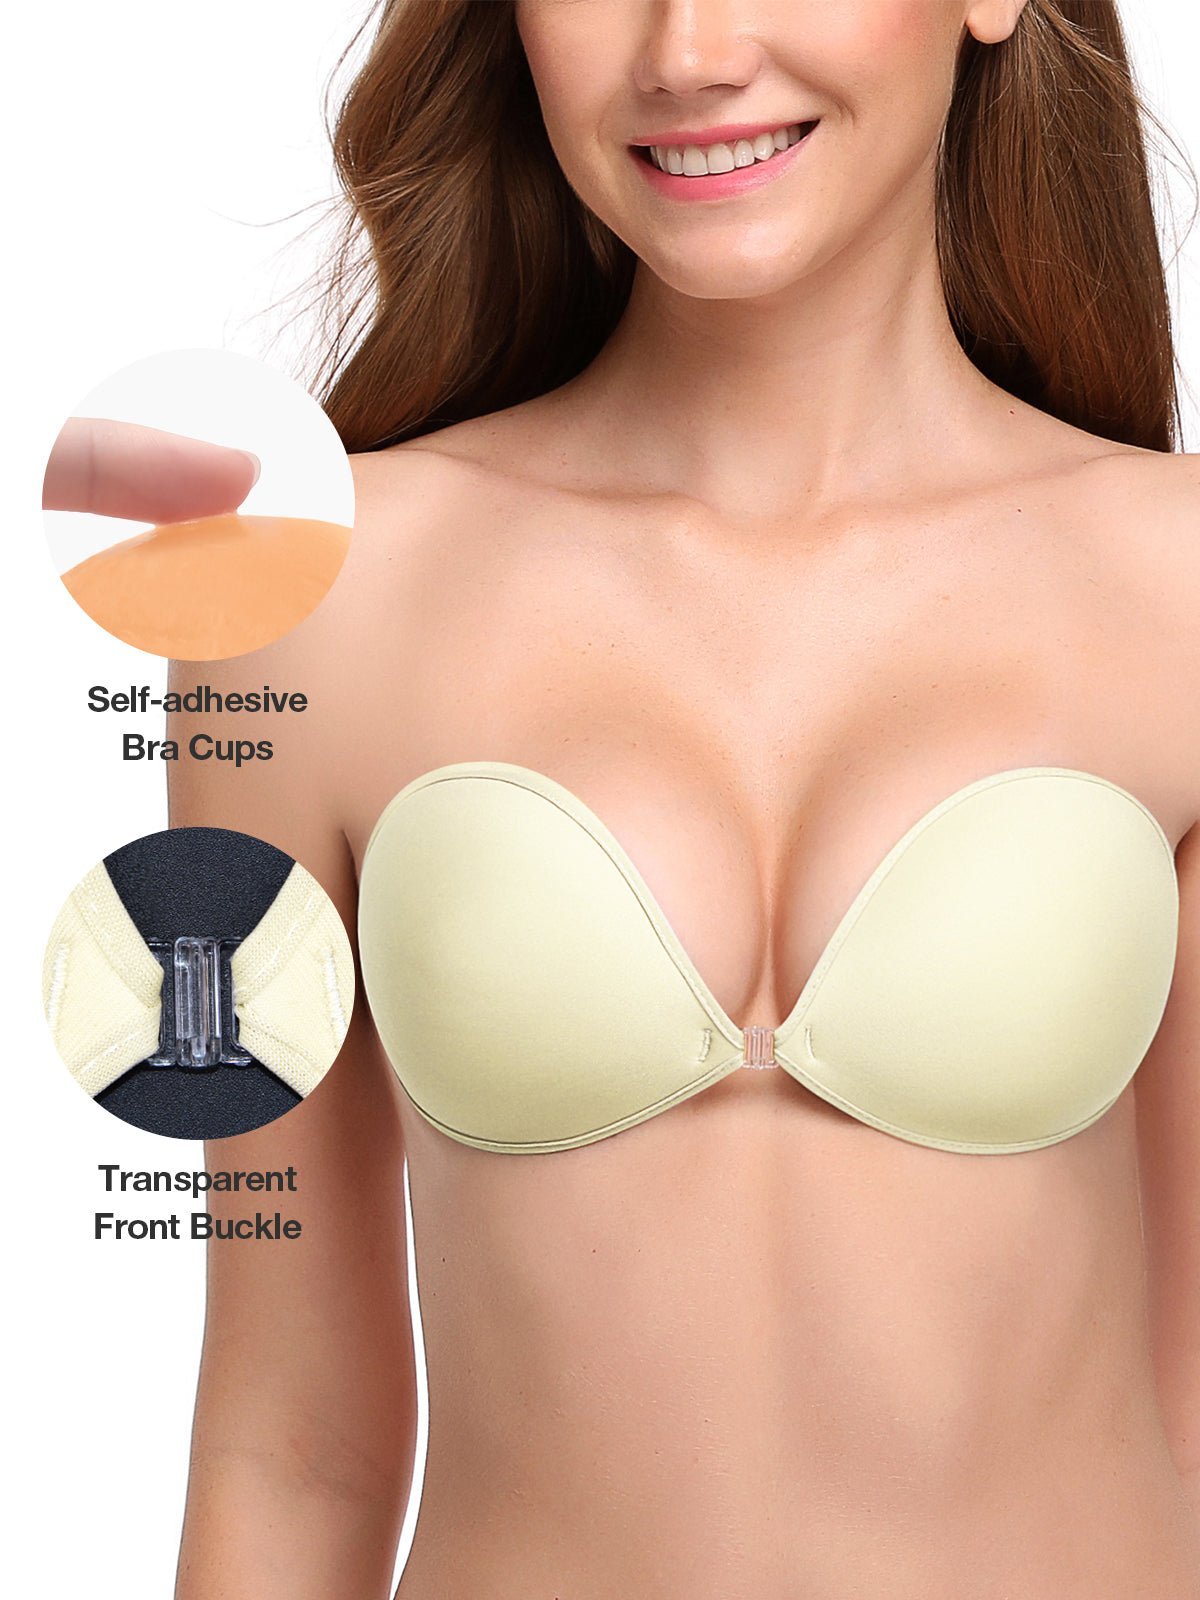 Adhesive Push-up Reusable Self Silicone Bra Beige